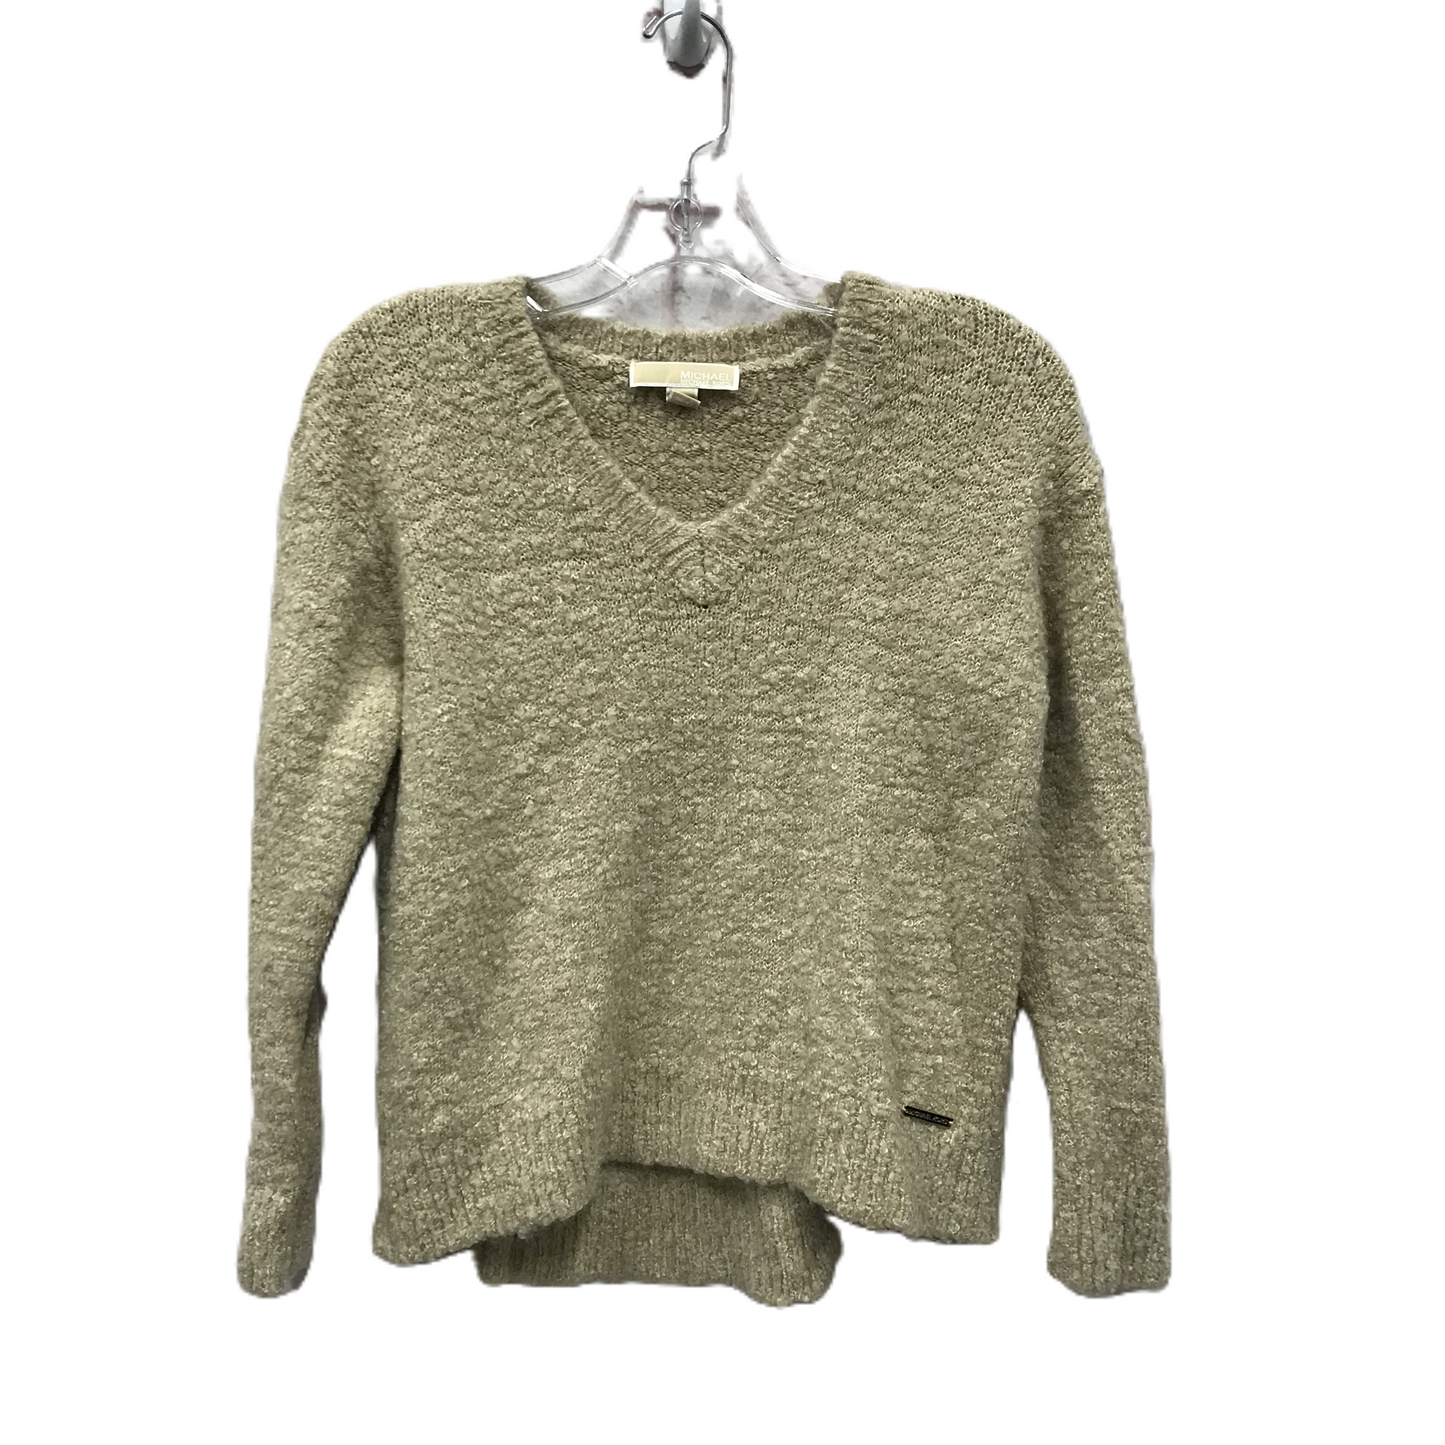 Tan Sweater By Michael By Michael Kors, Size: S